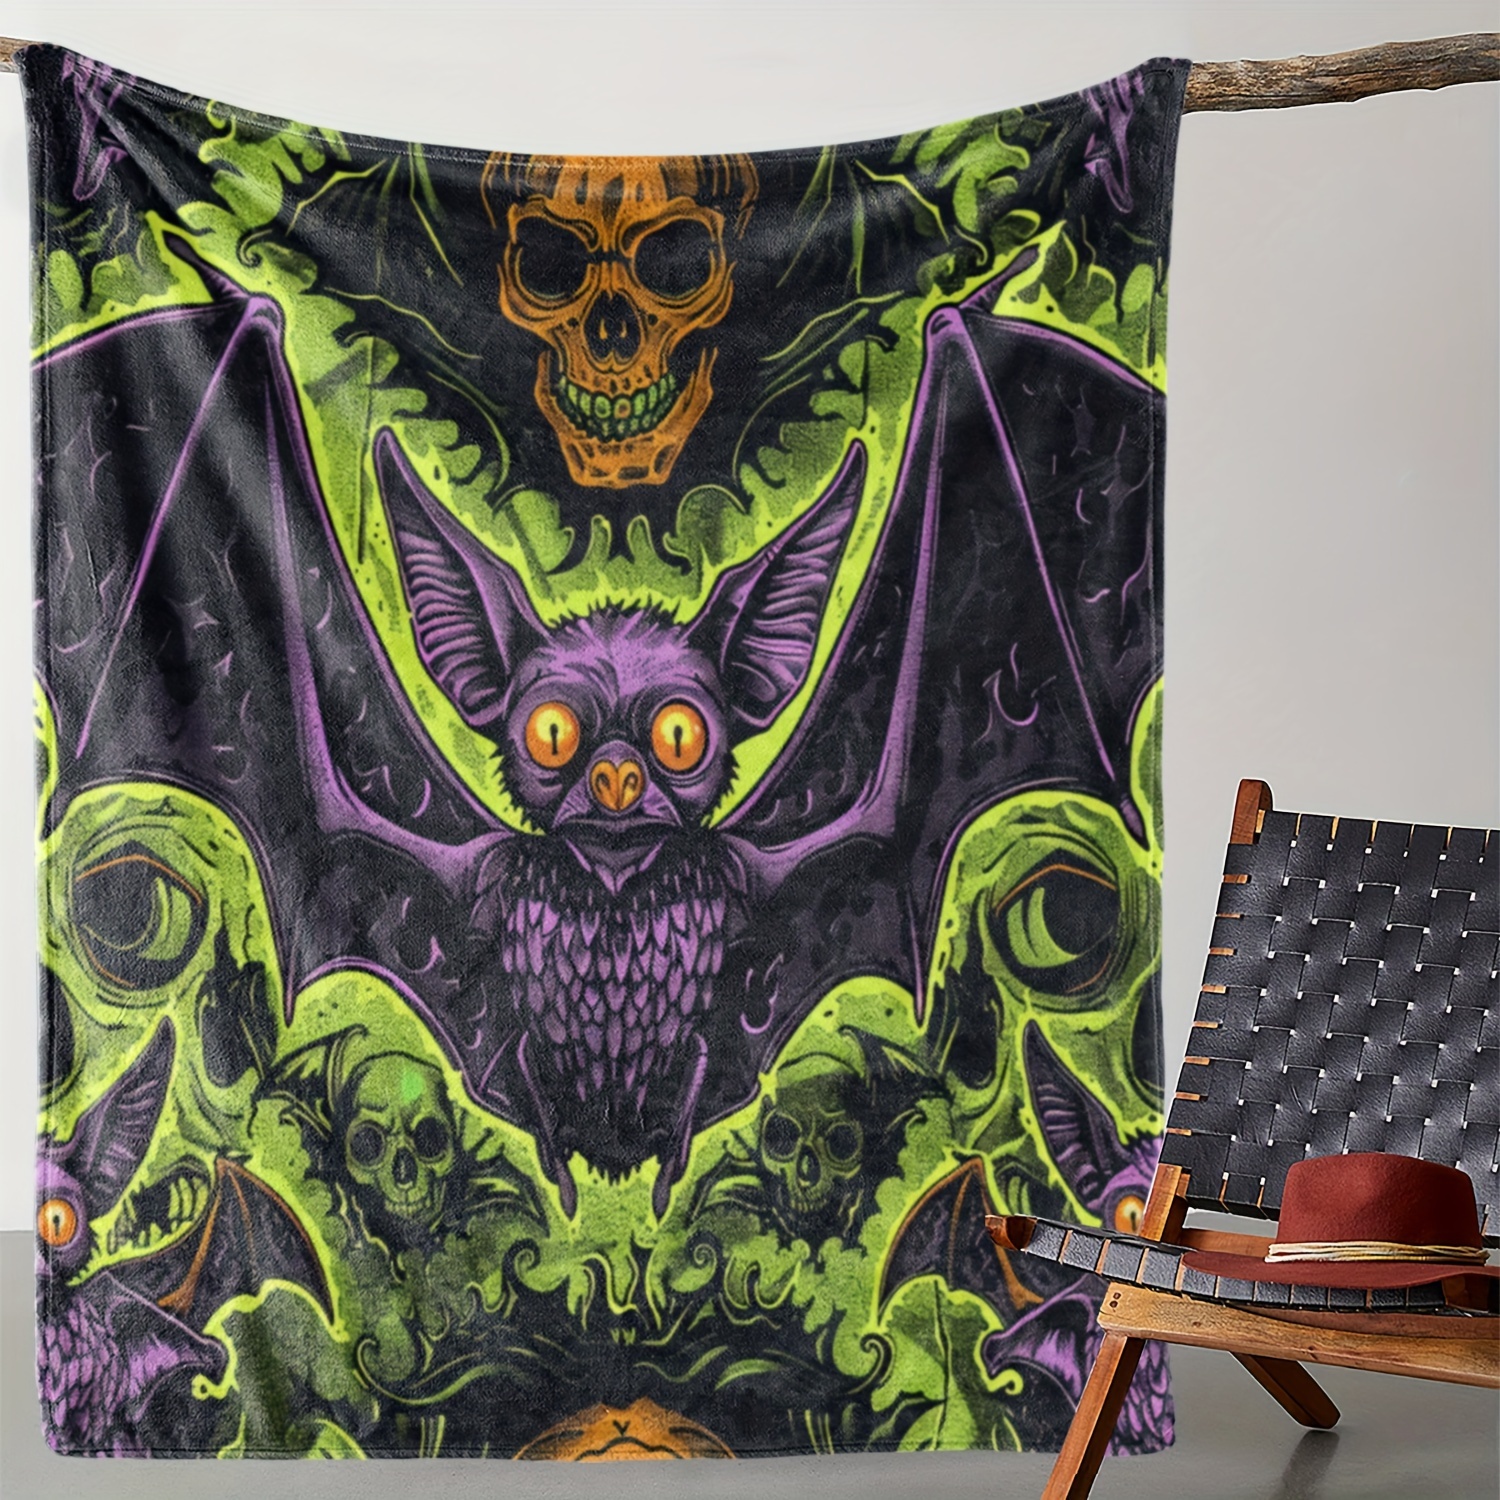 

Cozy Vintage-style Flannel Blanket With Halloween Bat & Design - Soft, Warm Throw For Couch, Bed, Office, And Travel - All-season Comfort